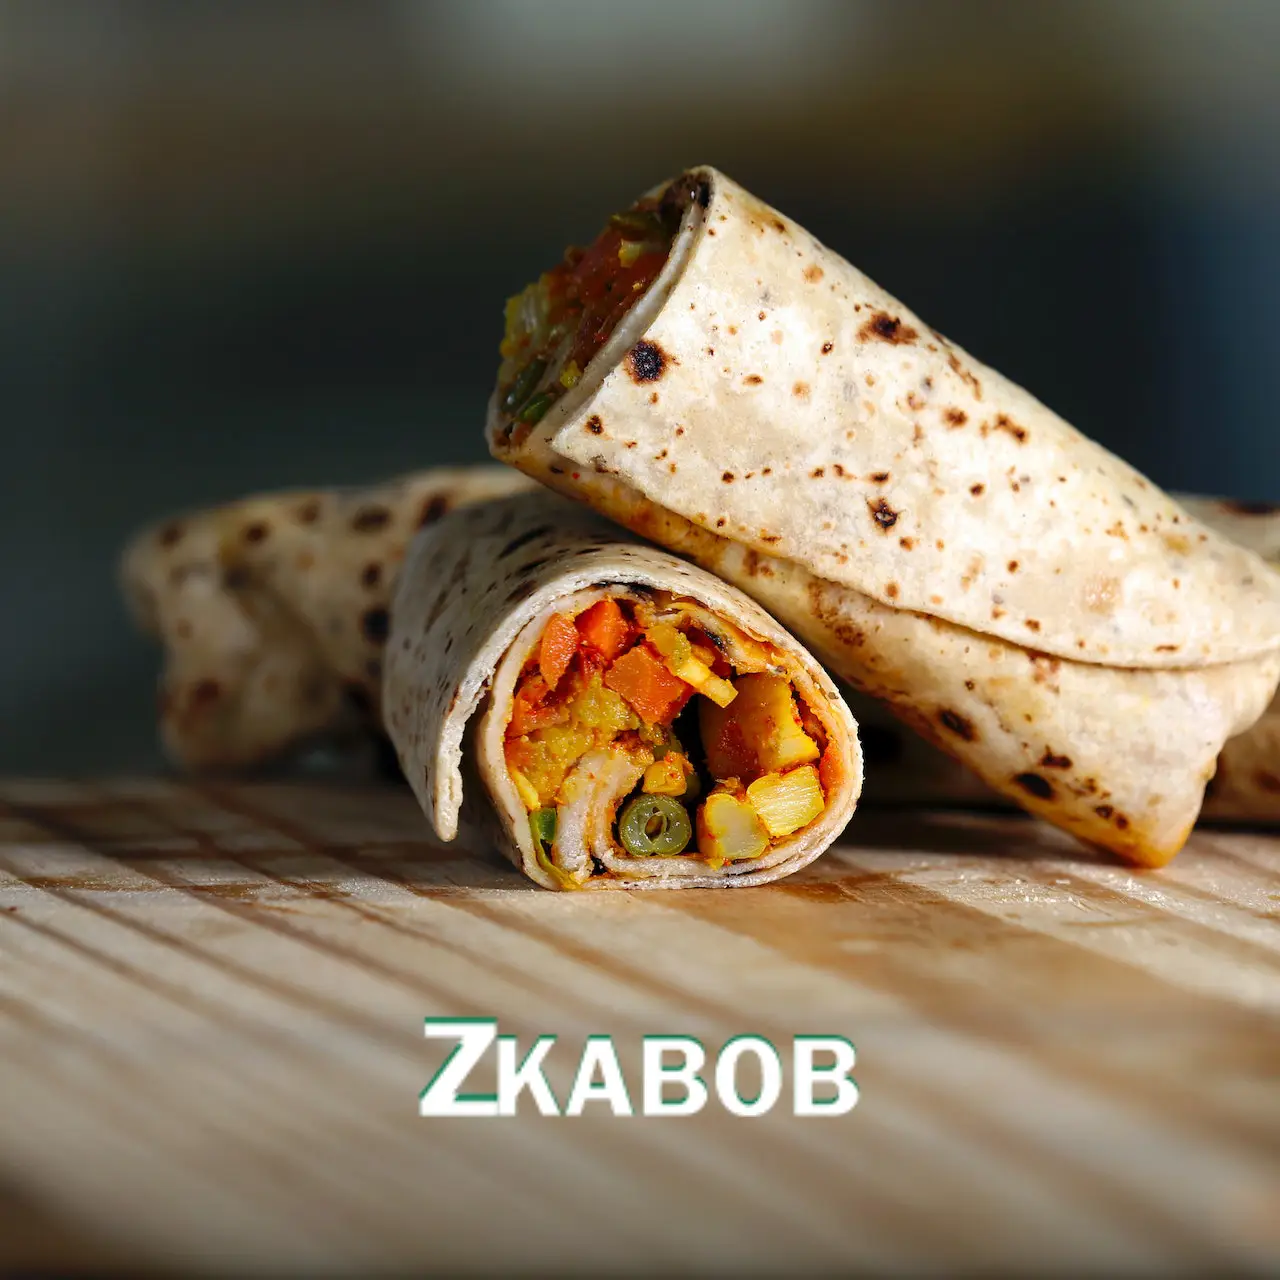 Two pieces of kebab wraps